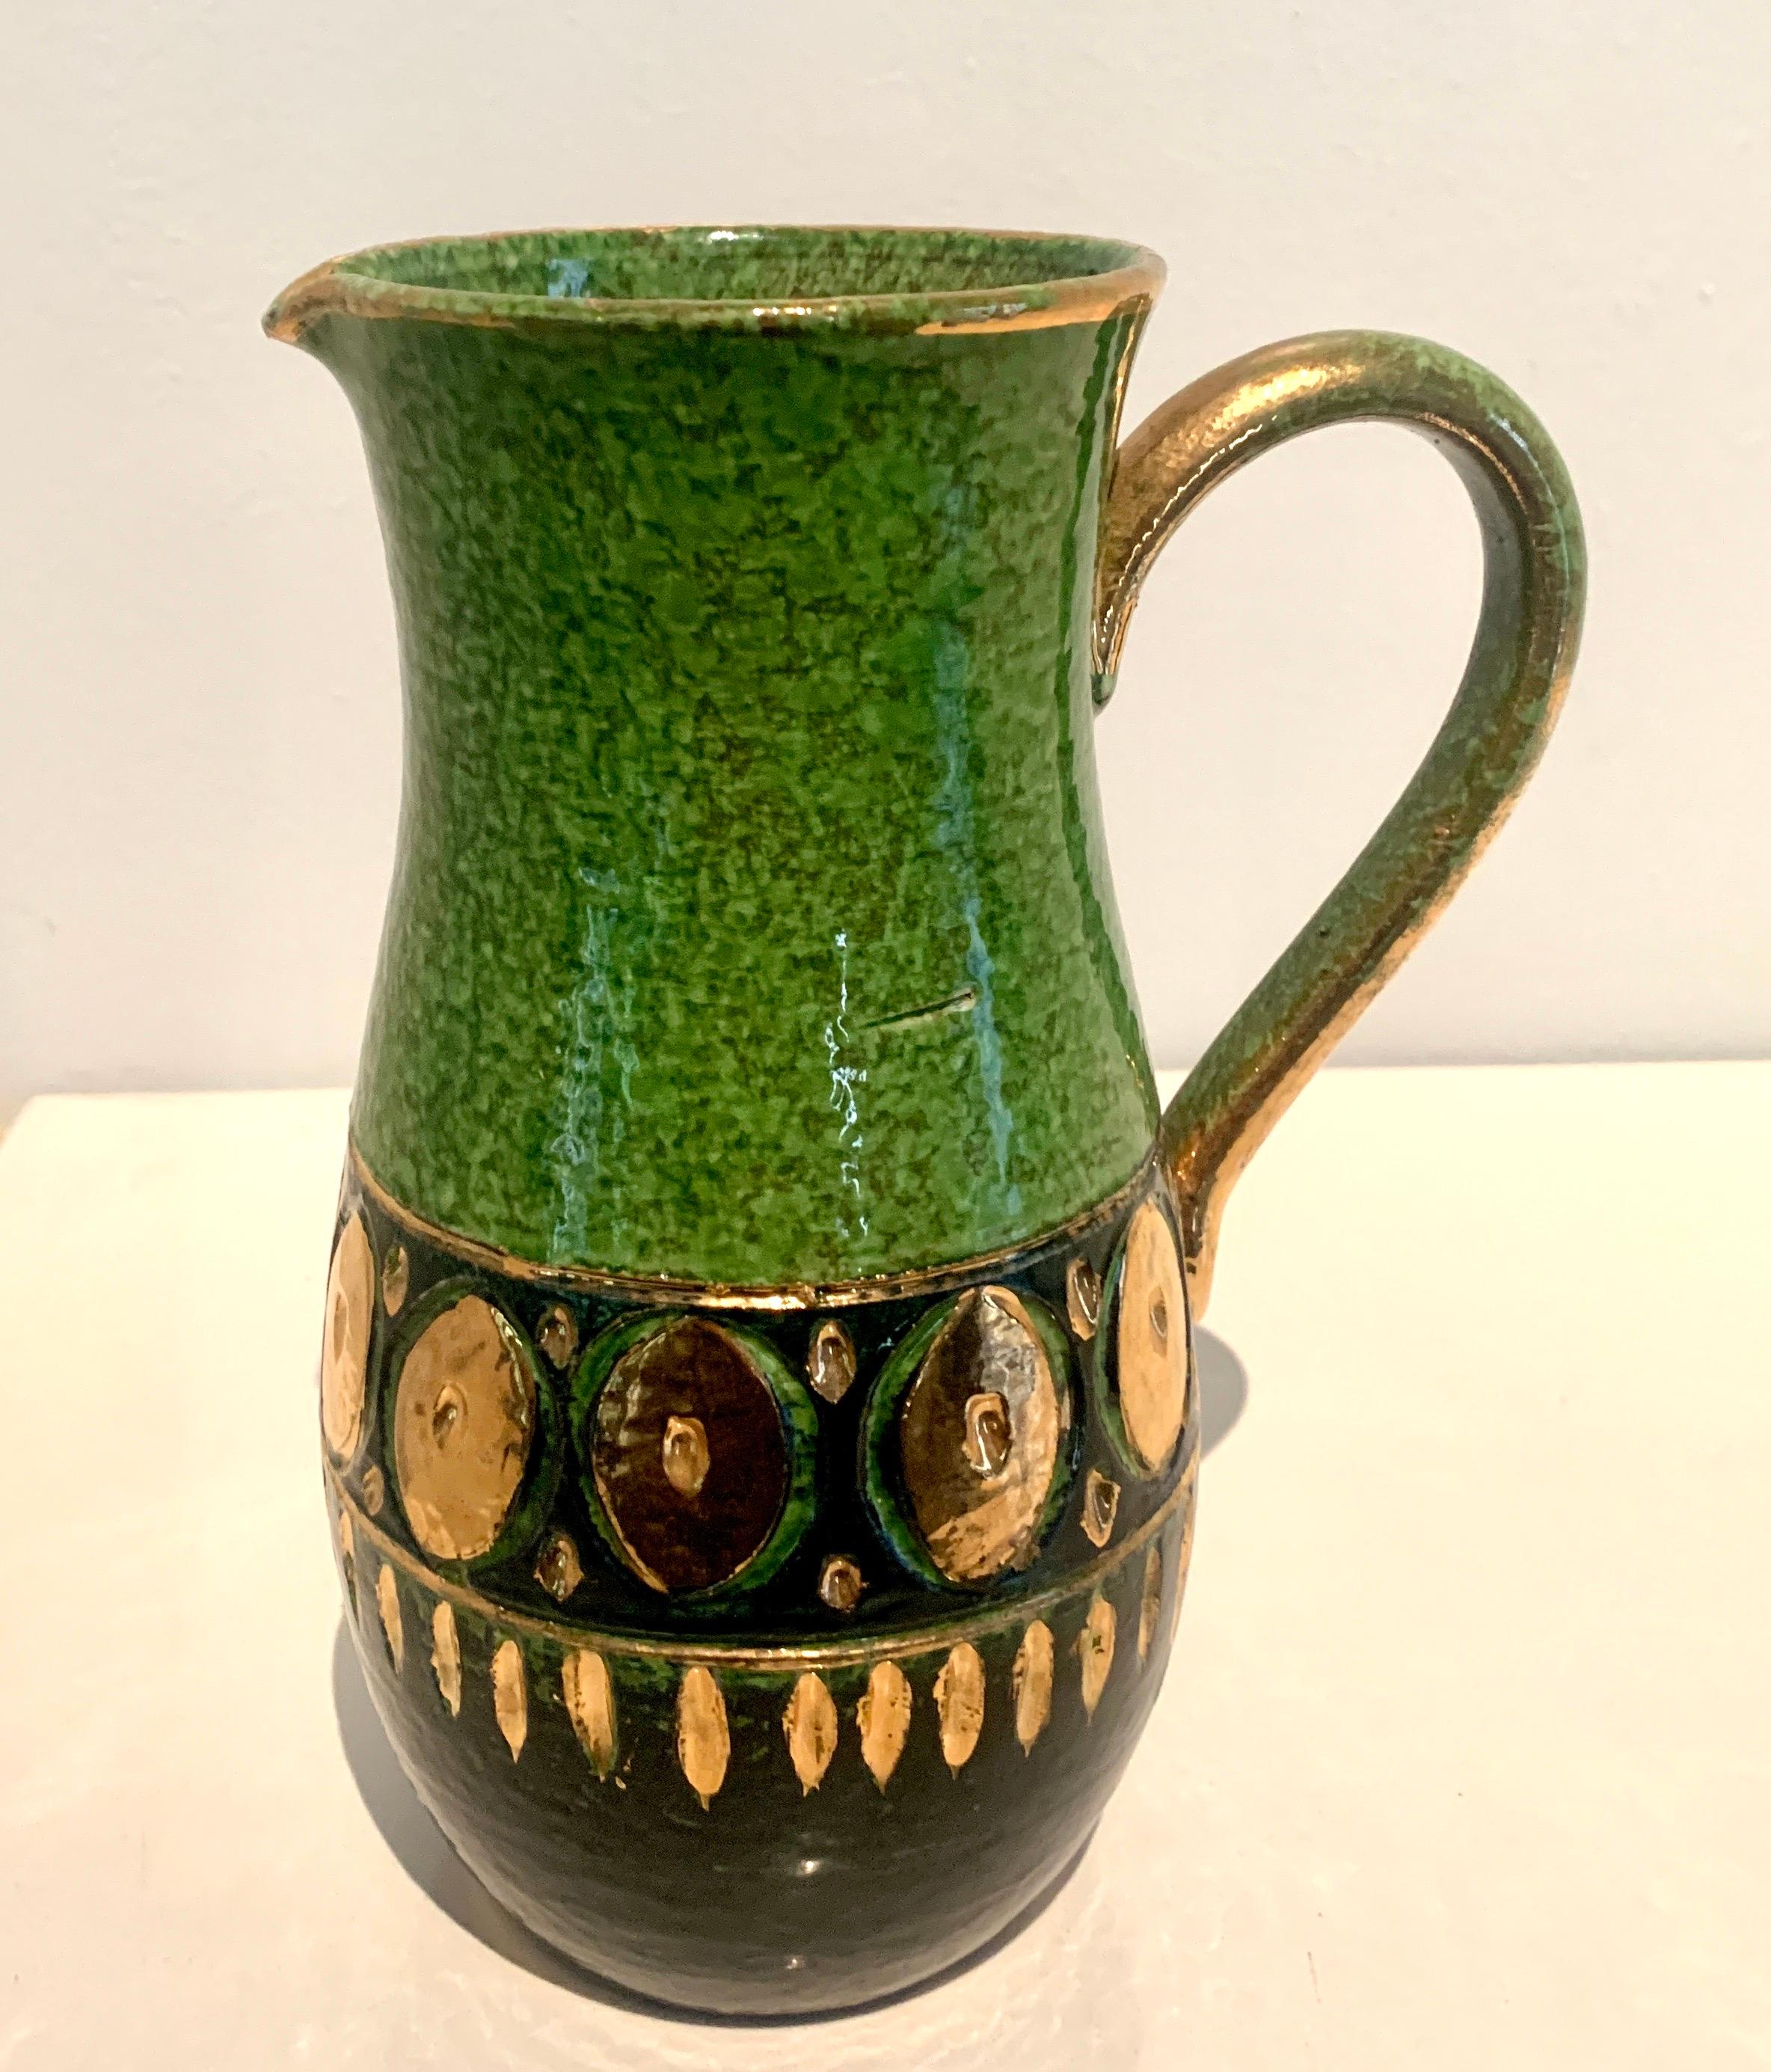 Italian Bitossi Ceramic Pitcher with Green and Gold Accents 1